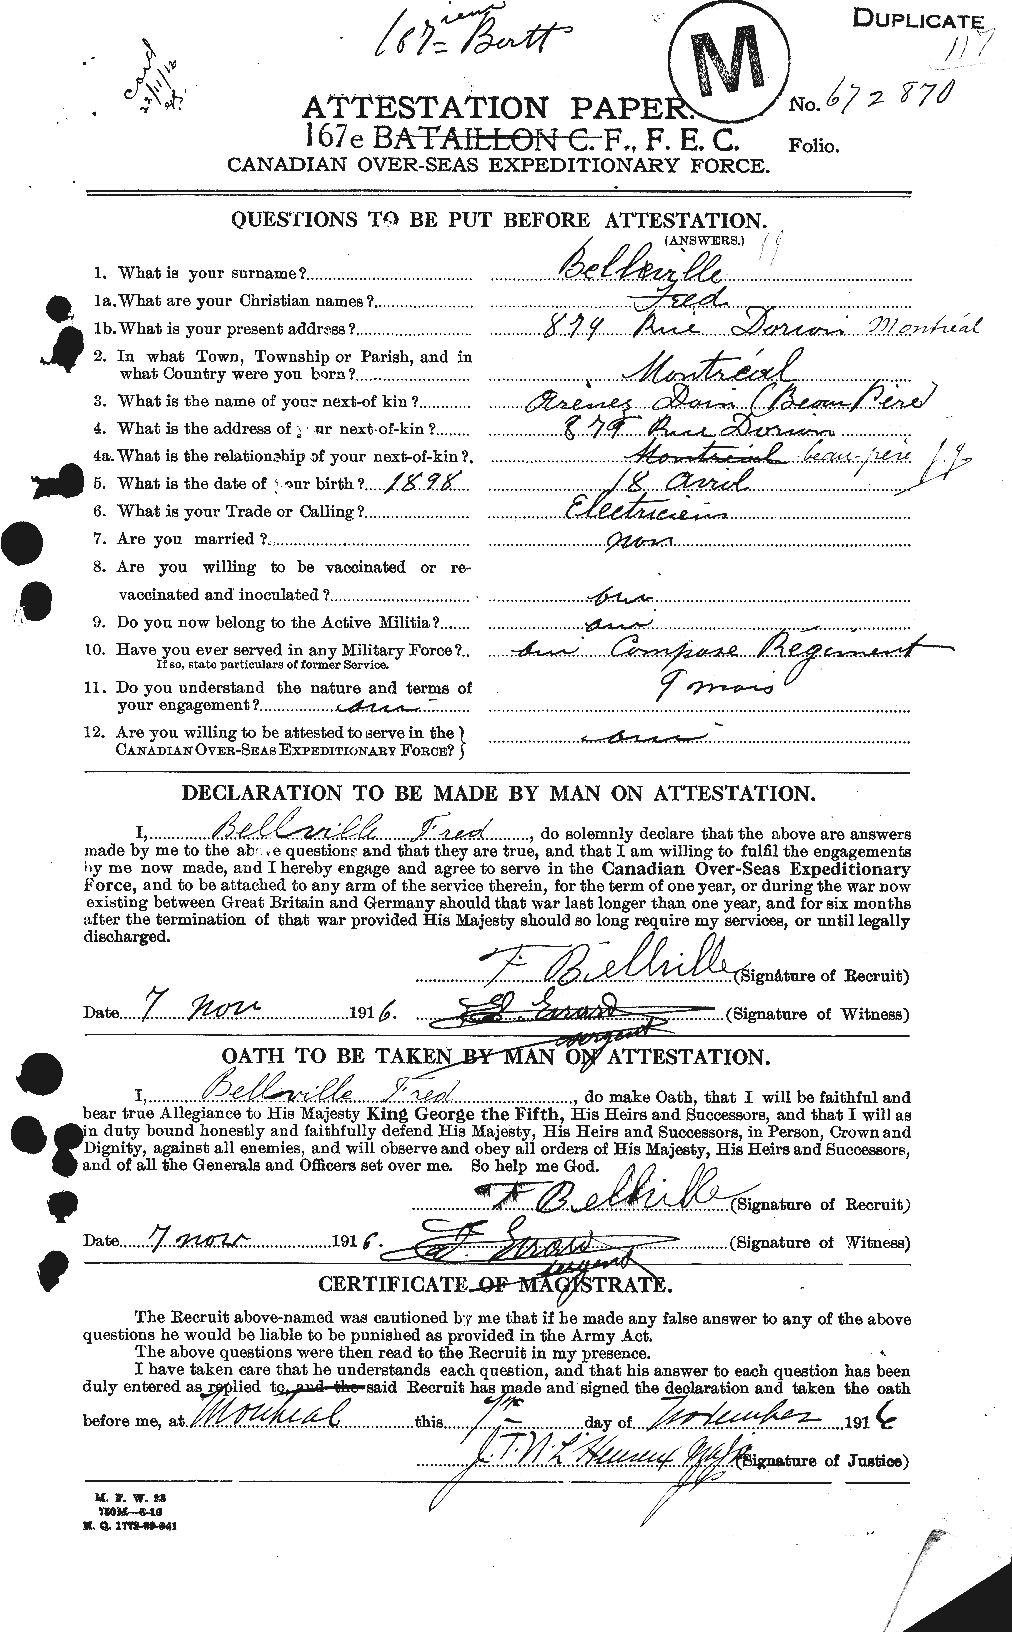 Personnel Records of the First World War - CEF 233572a